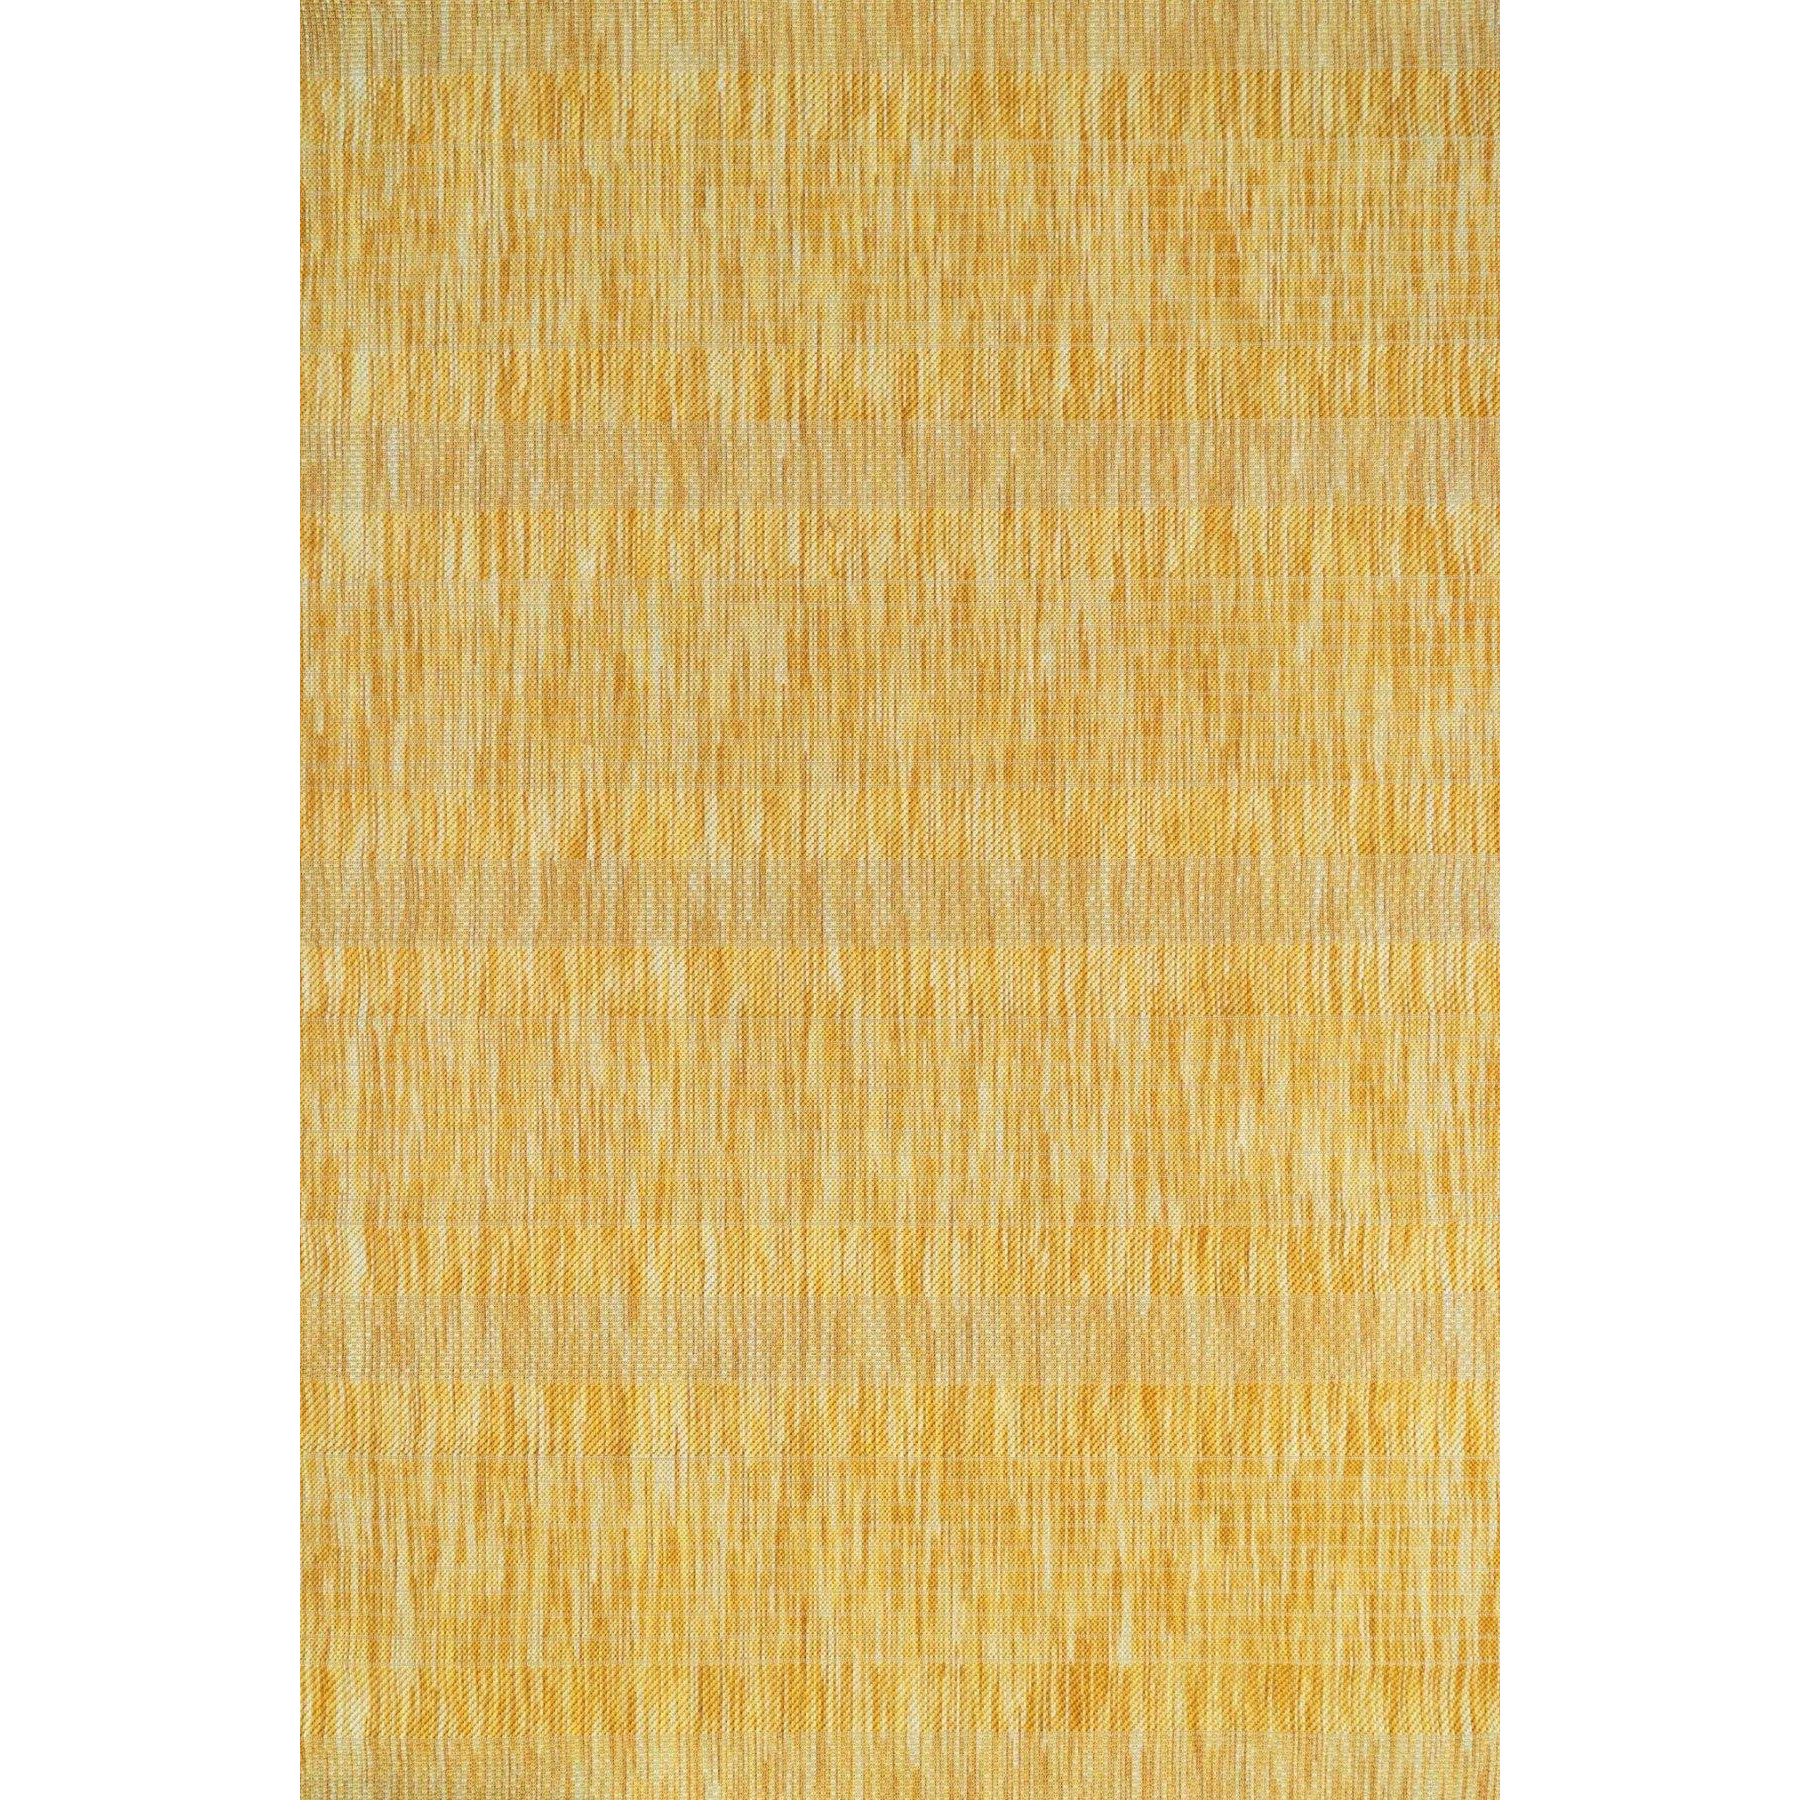 Sunflower Yellow Outdoor, Garden and Patio Area Rug - image 1